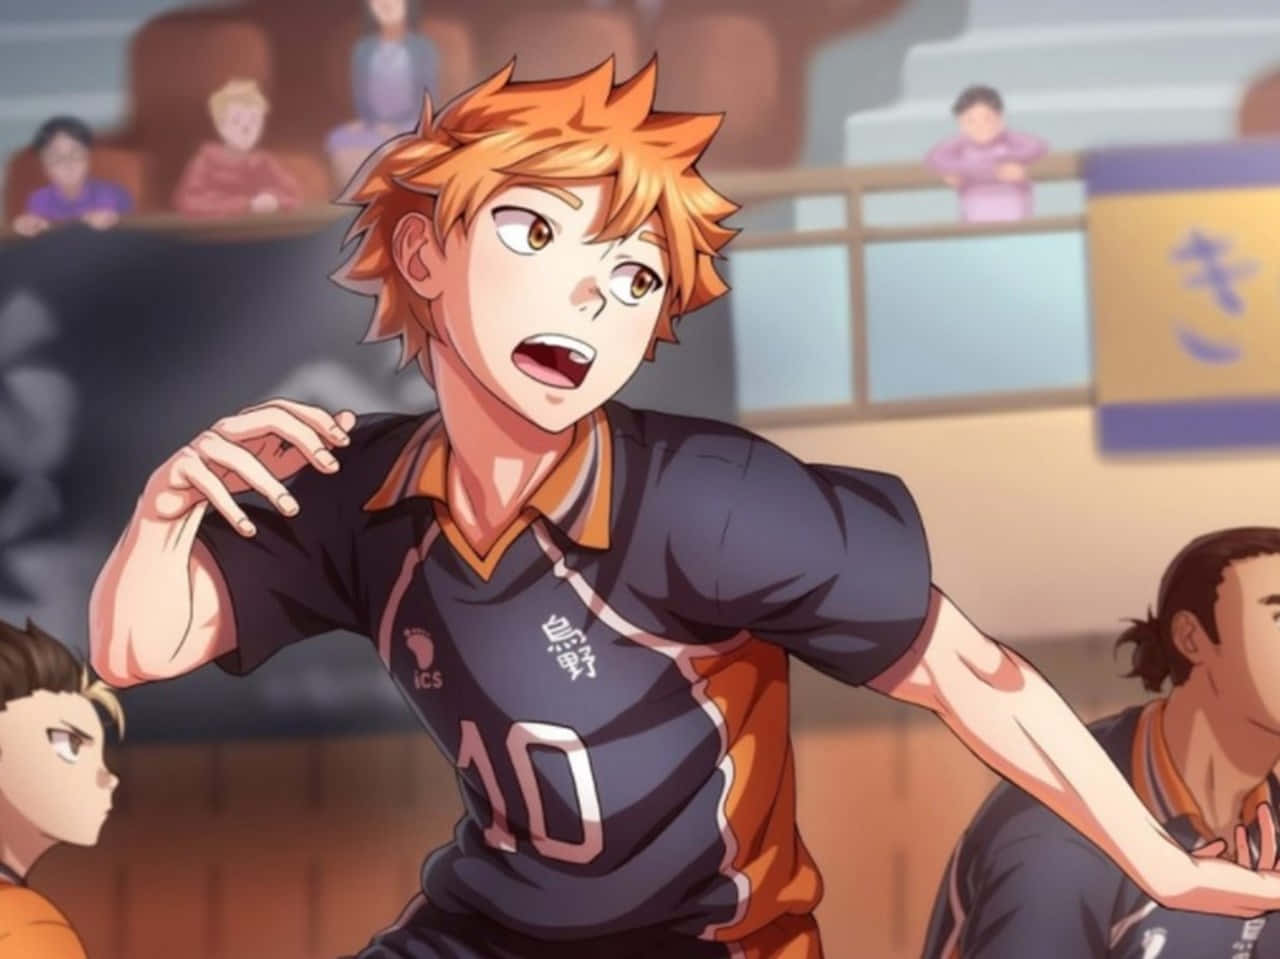 Dynamic Haikyuu!! Volleyball Heroes in Action Wallpaper